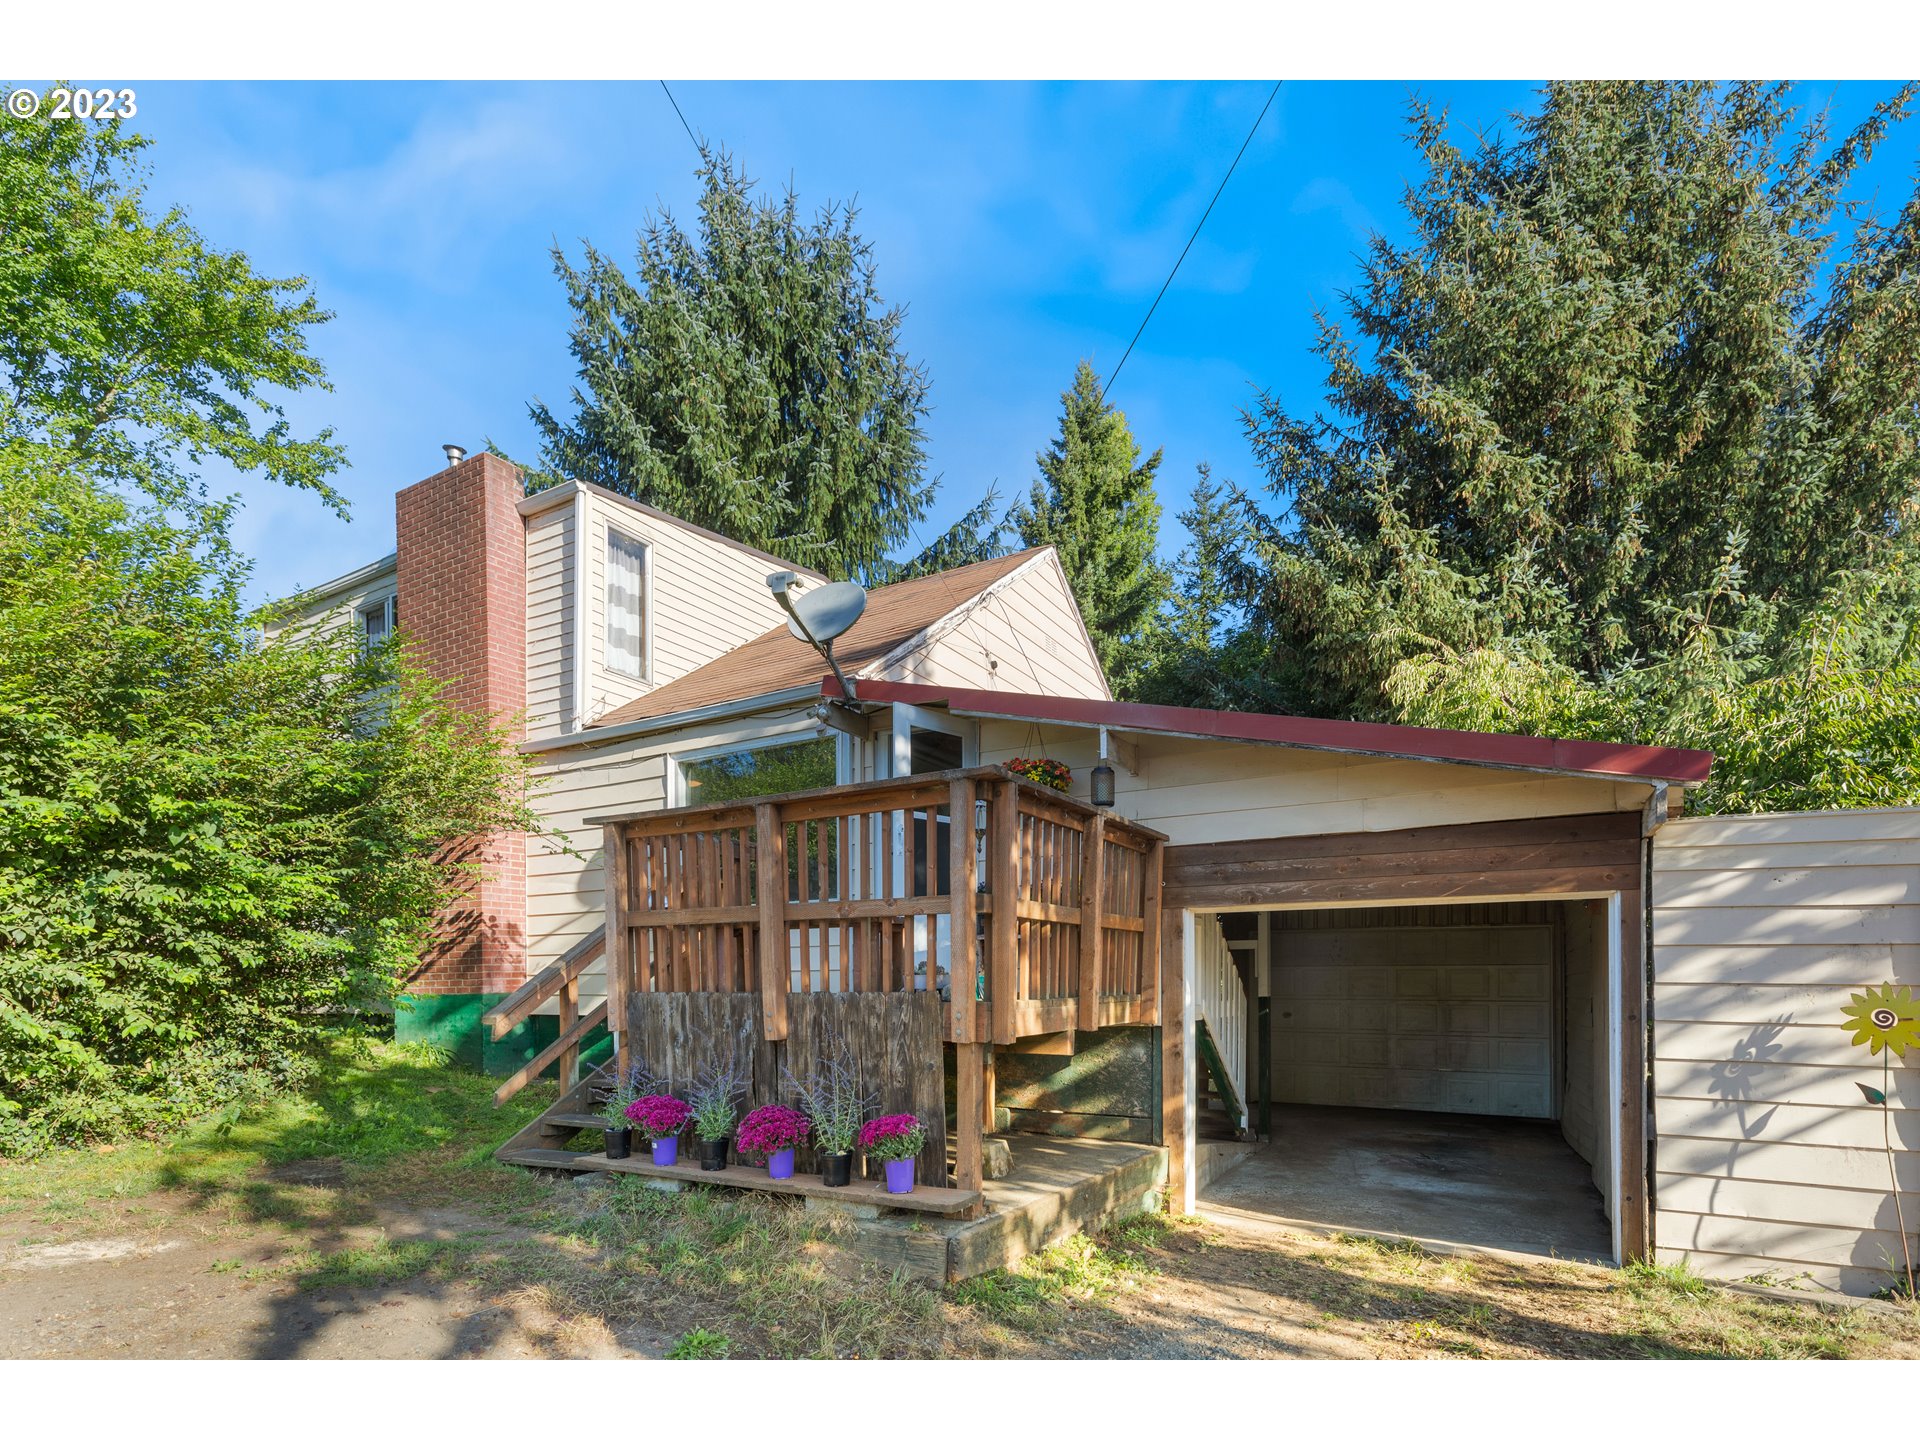 760 CLARK ST, North Bend, OR 97459